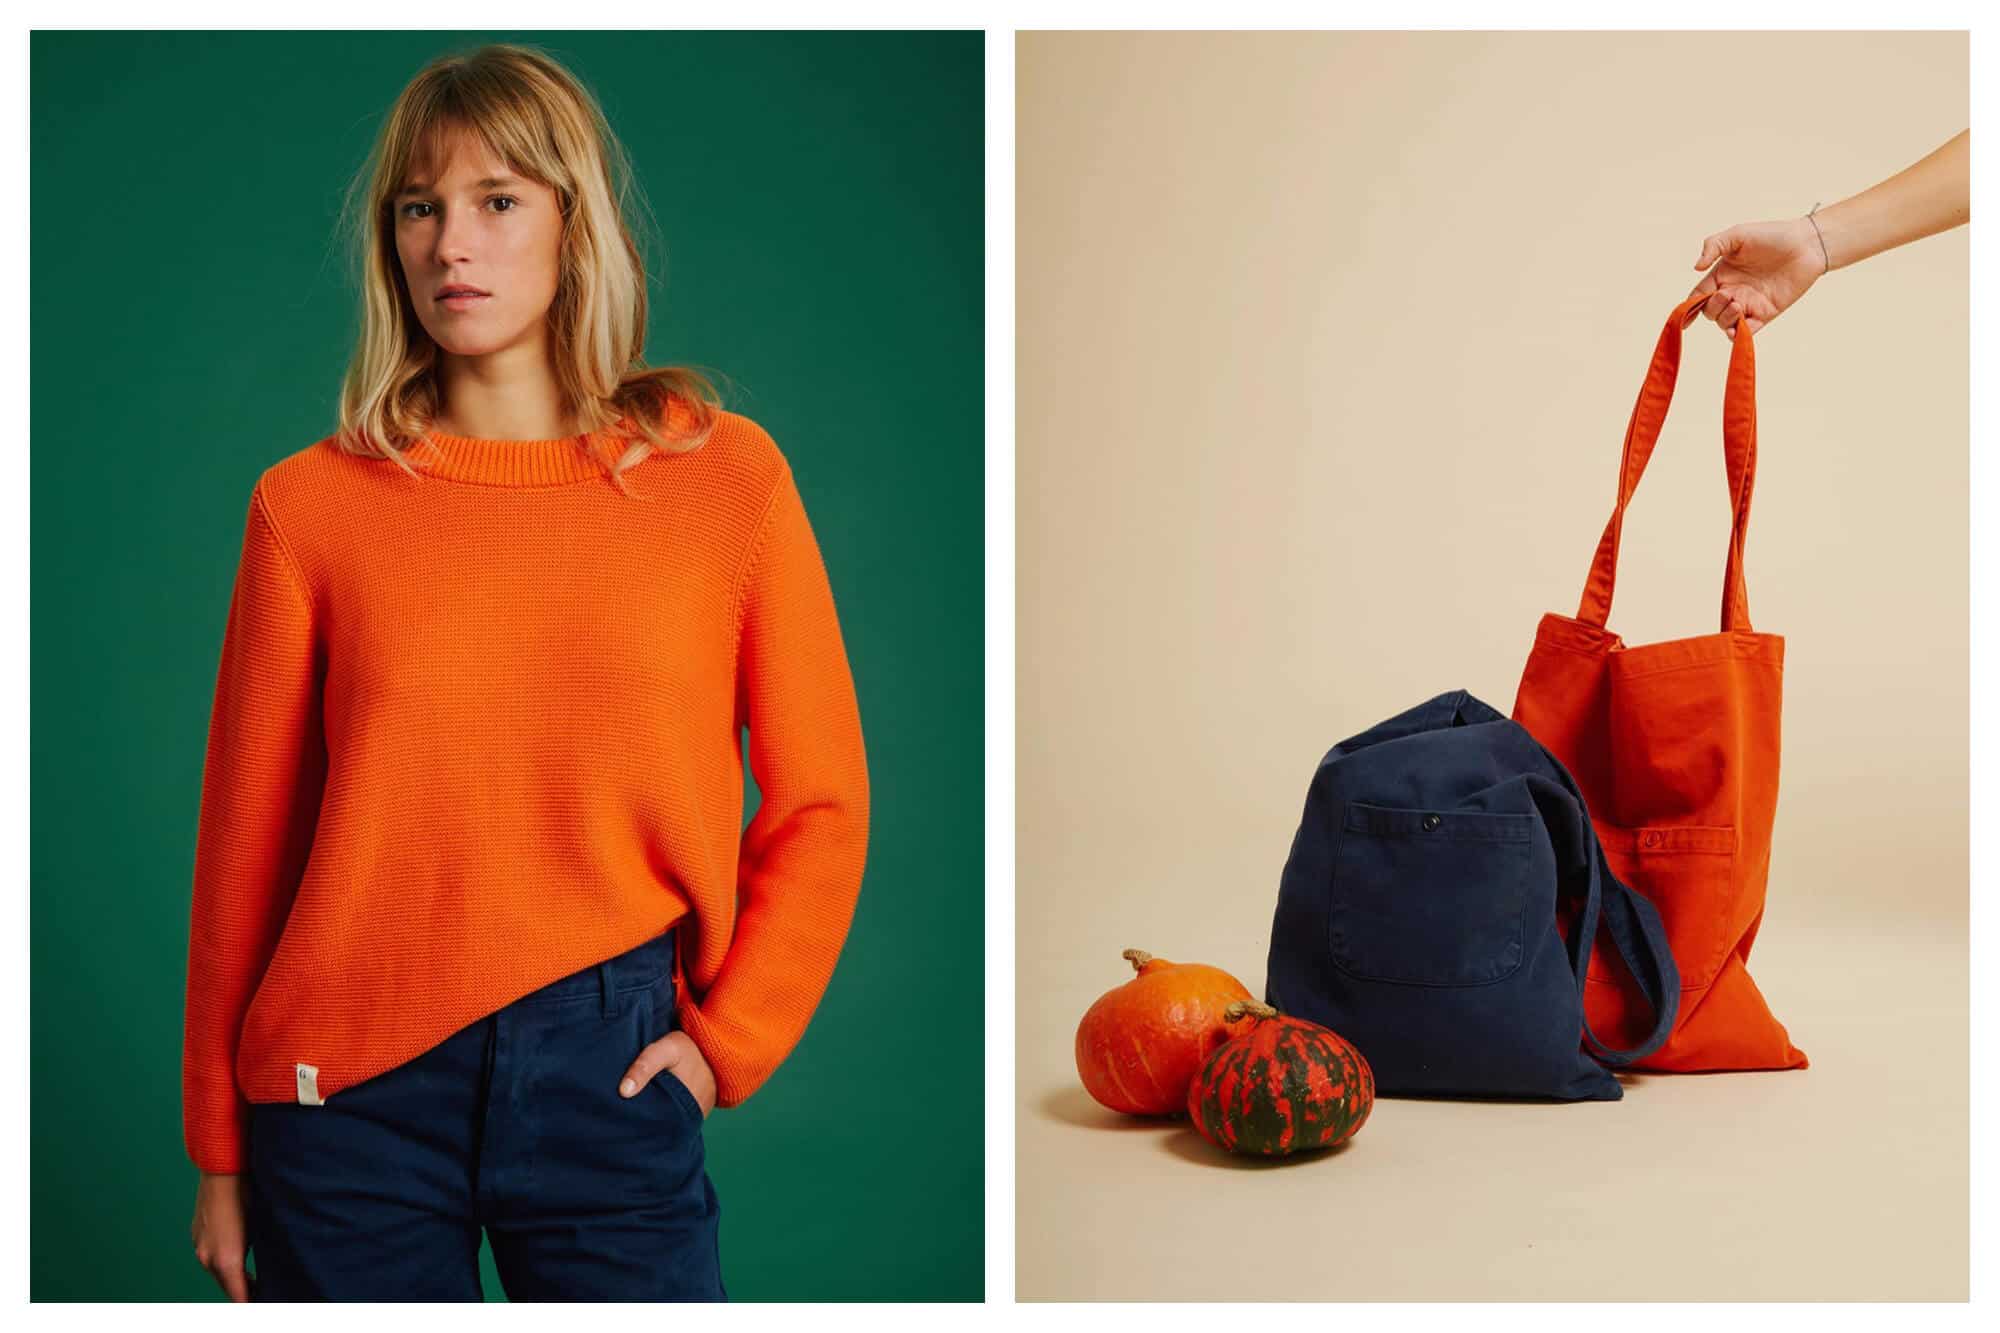 Left: a blonde woman wearing a bright orange knit jumper and navy blue pants. She has one hand in her pocket. Right: two bags, one bright orange and one navy blue, with a hand holding onto the strap of the orange one. There are also two orange pumpkins next to them.